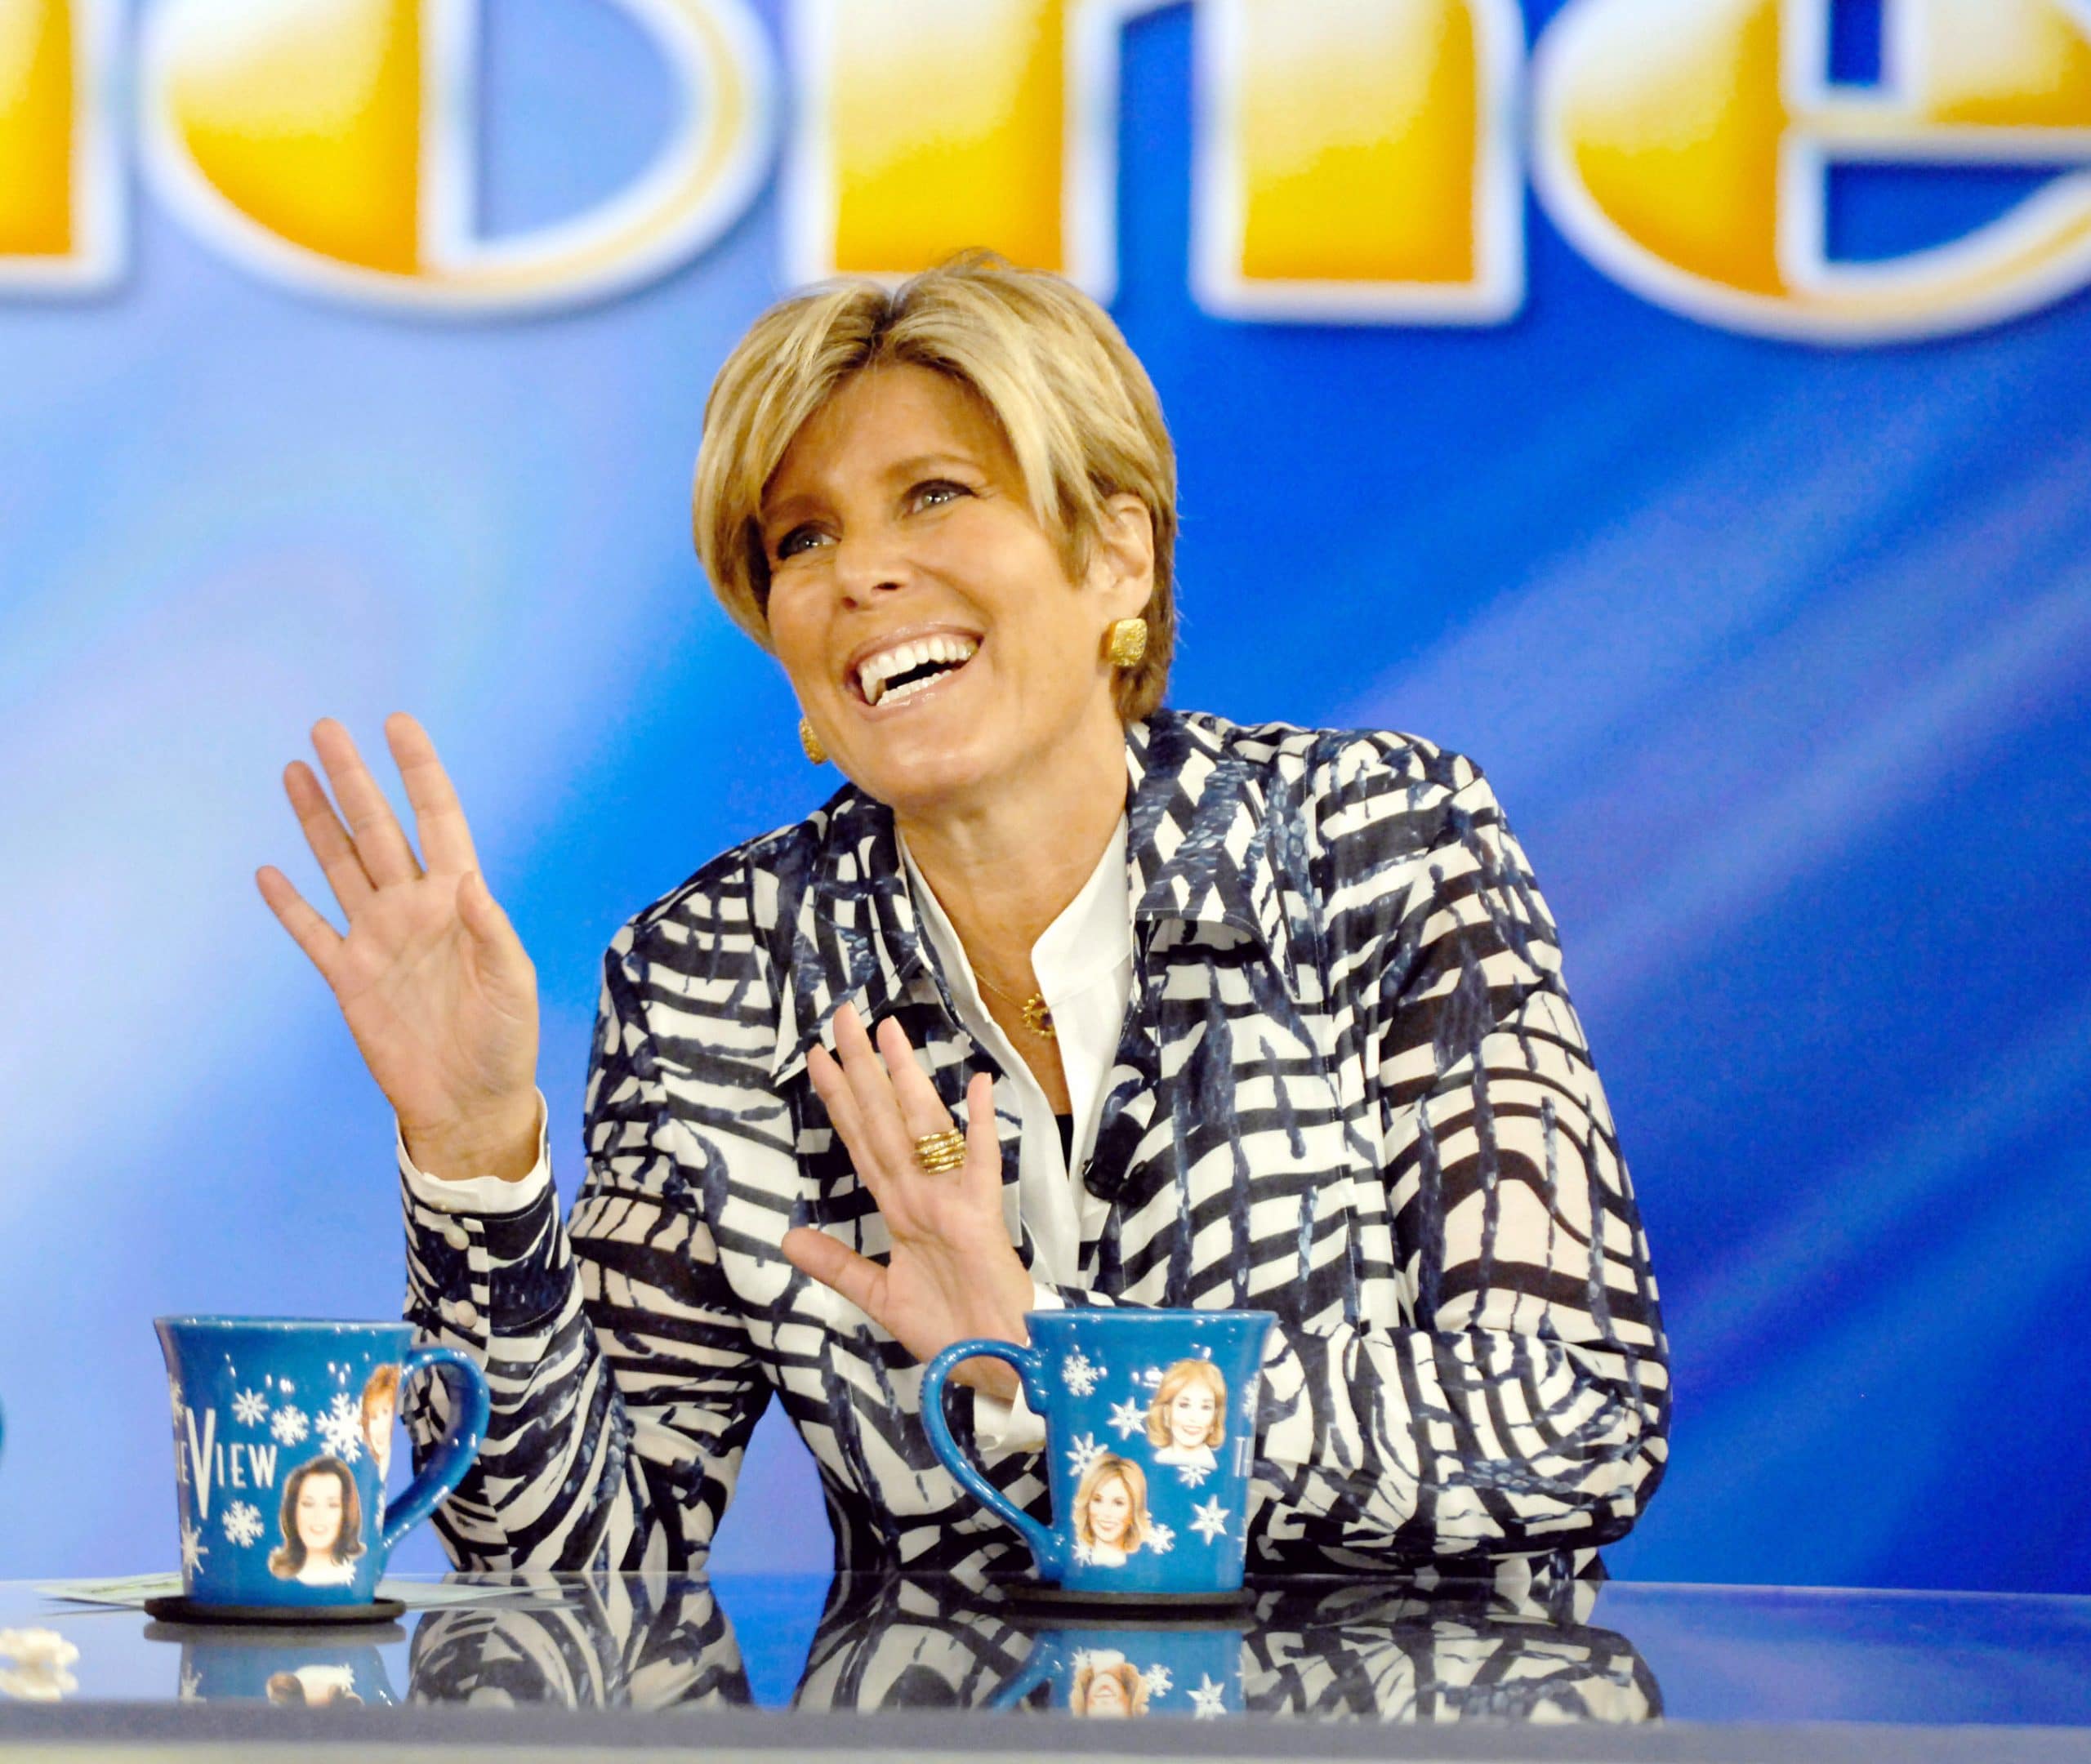 THE VIEW, Suze Orman